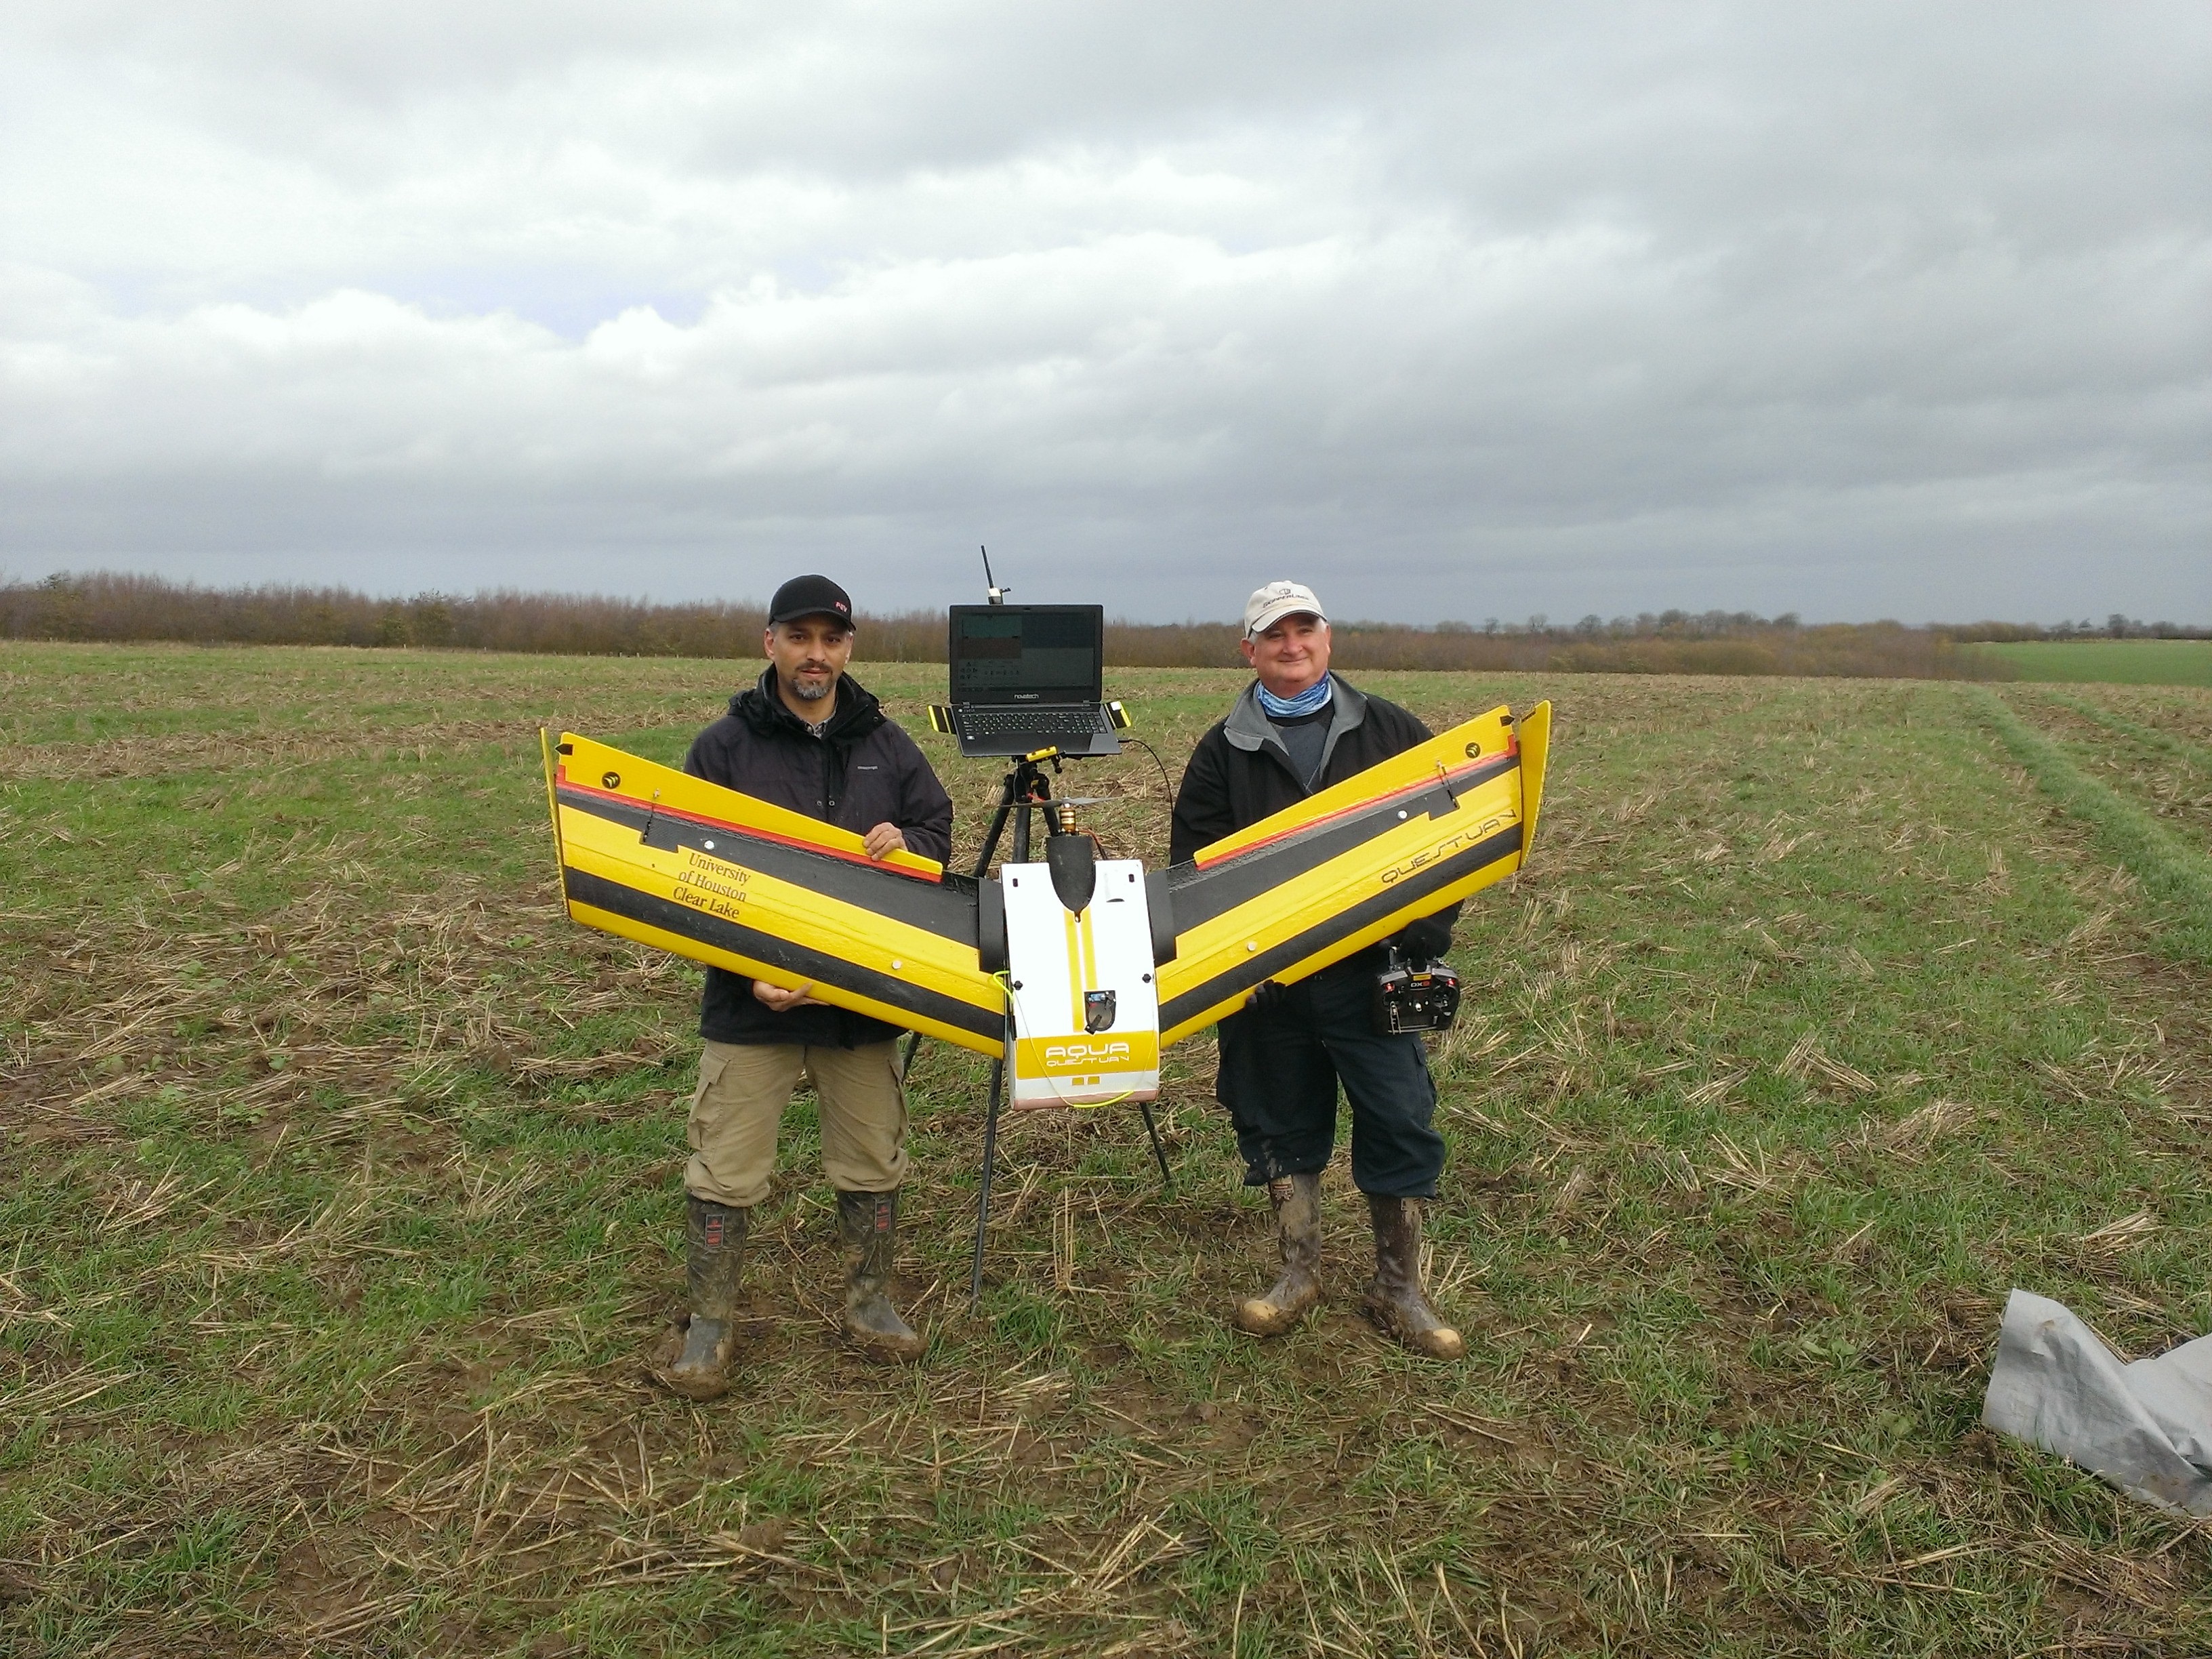 Senior research scientist Mustafa Mokrech and Research associate James Yokley with drone HAWK1. Photo courtesy of The Environmental Institute of Houston.